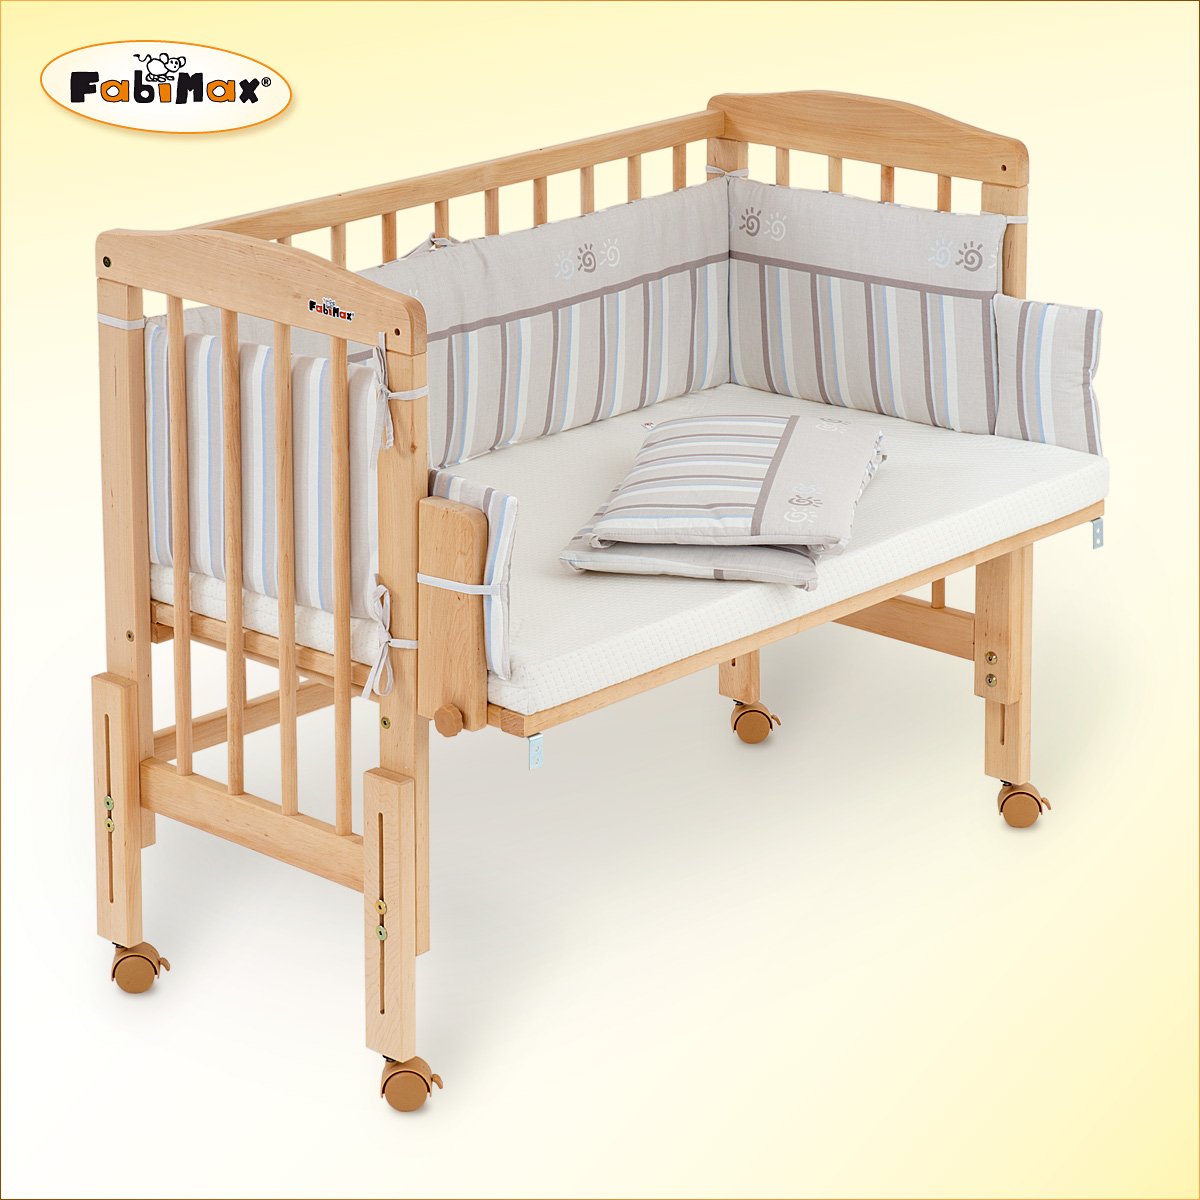 Fabimax Pro Co-Sleeping Cot With Mattress And Cot Bumper